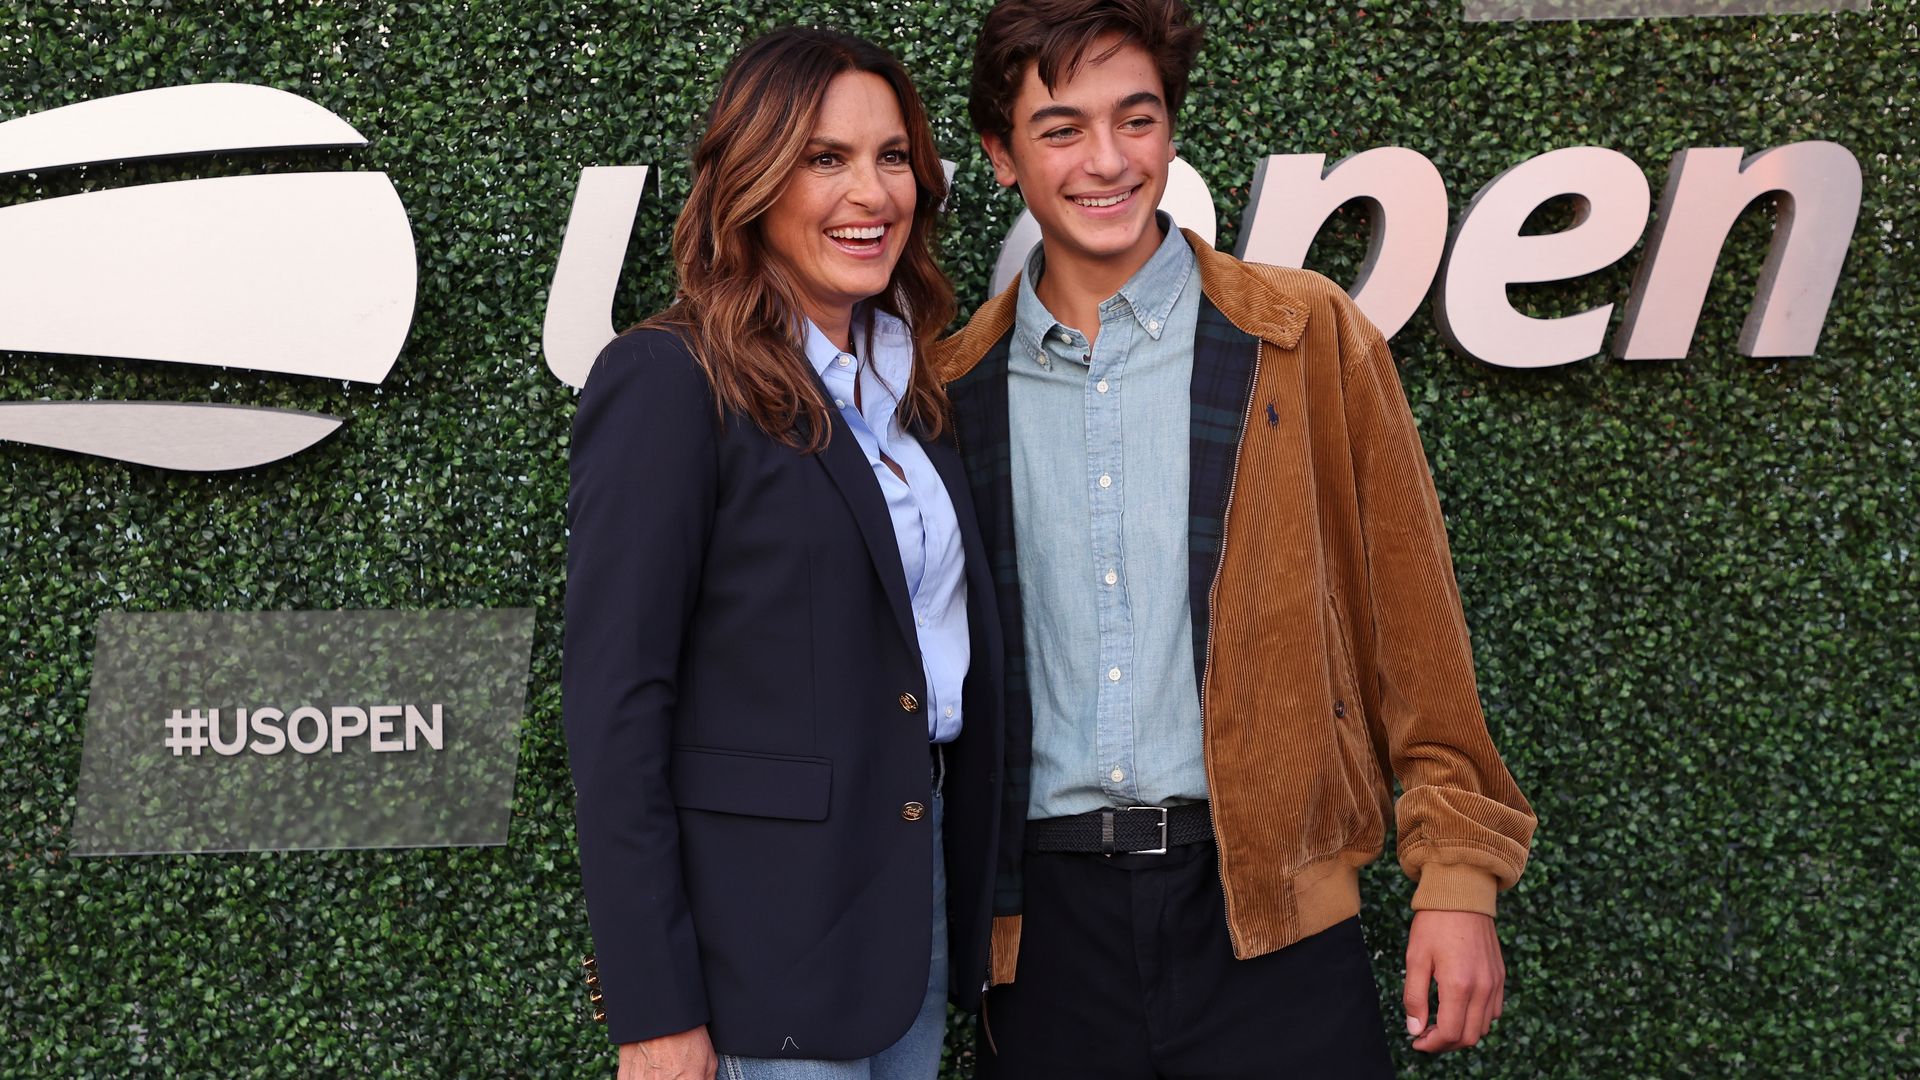 Mariska Hargitay reveals big news about son August's future and reveals what's stressing her out